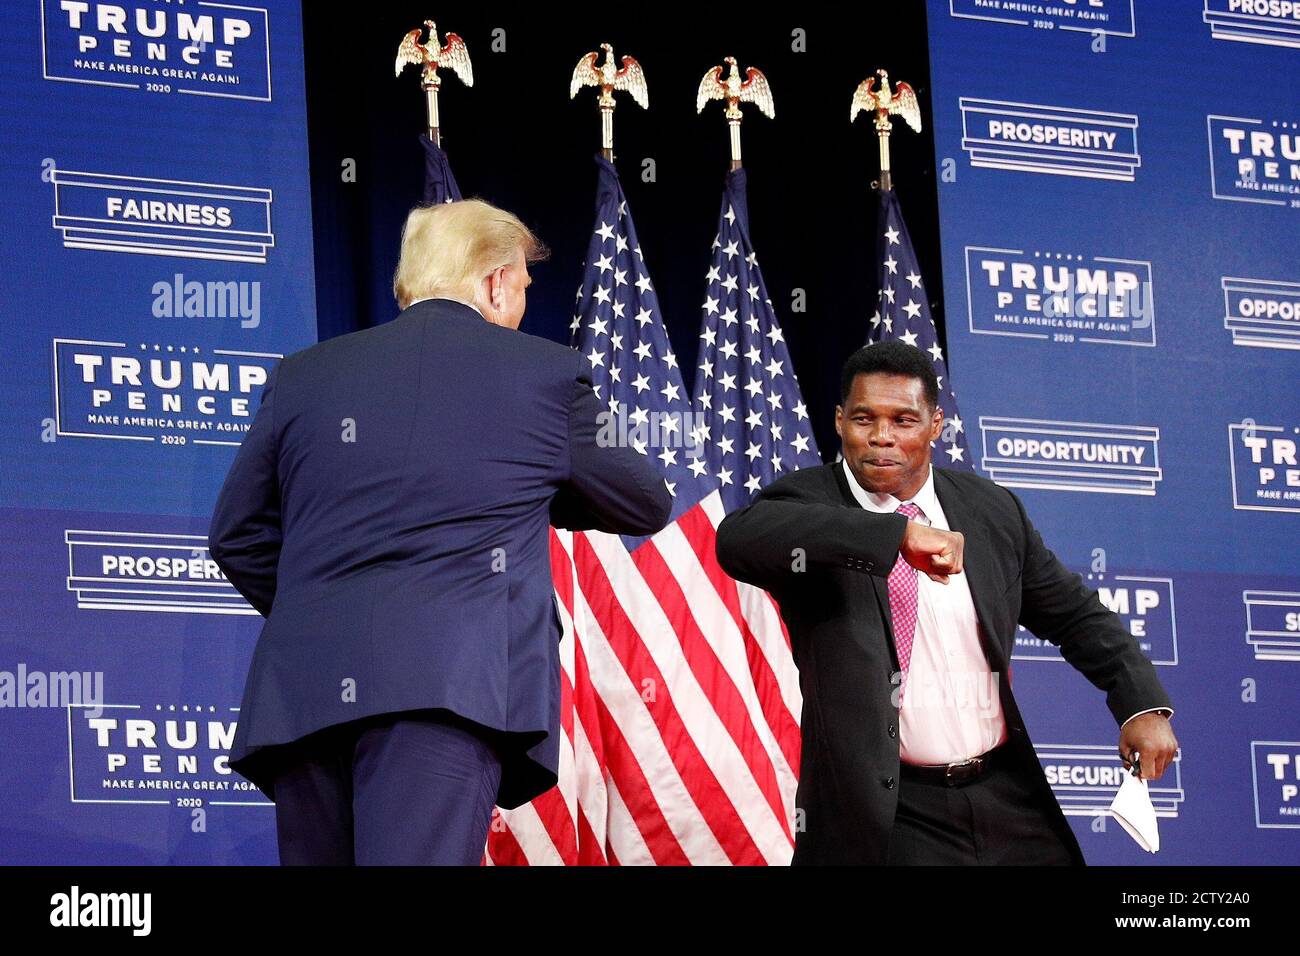 us-president-donald-trump-elbow-bumps-retired-nfl-football-player-herschel-walker-before-delivering-remarks-on-black-economic-empowerment-during-an-event-at-the-cobb-galleria-centre-in-atlanta-georgia-us-september-25-2020-reuterstom-brenner-2CTY2A0.jpg